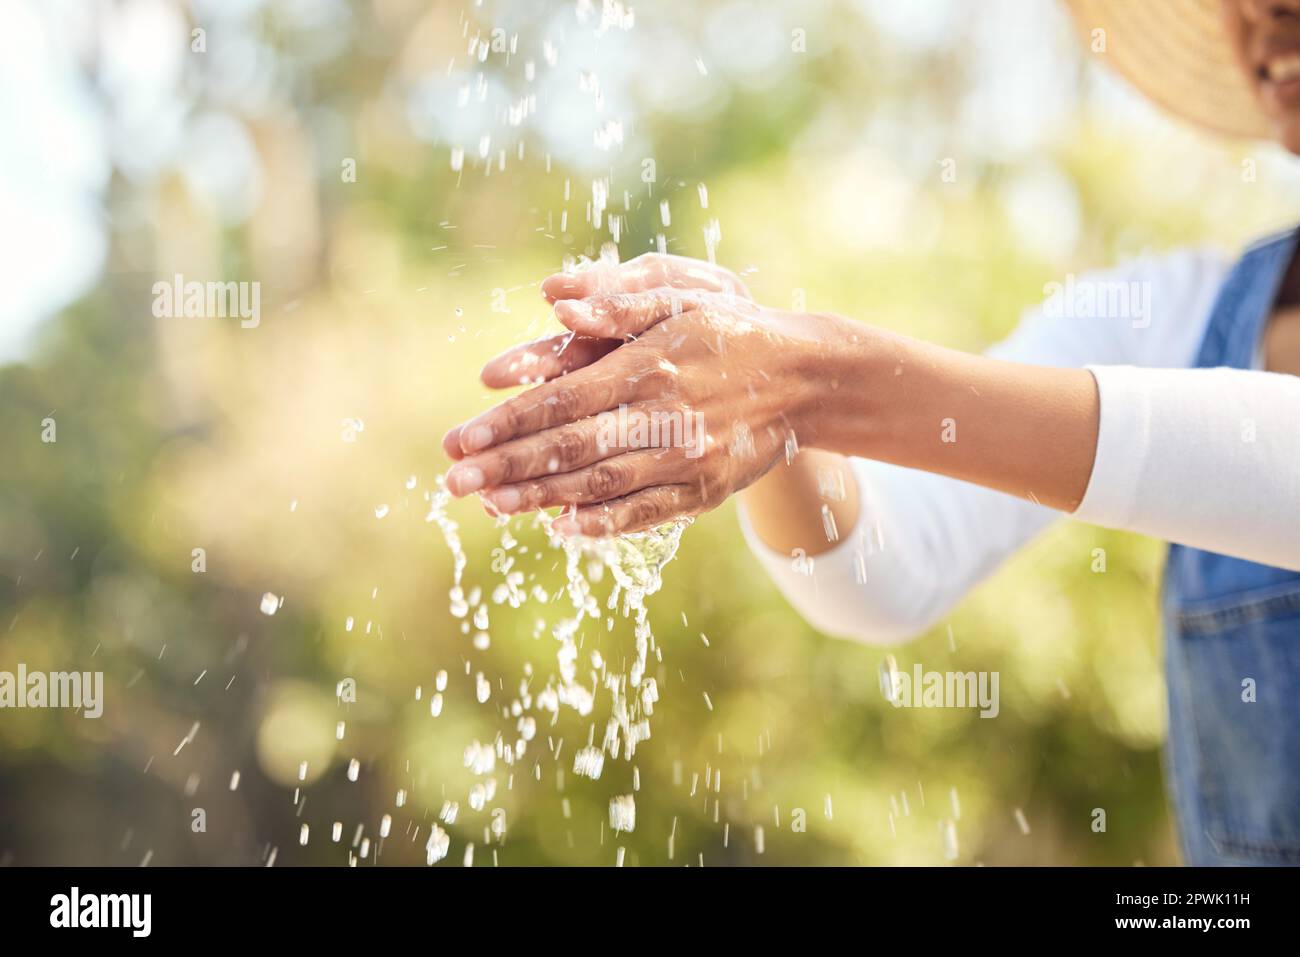 Keep it clean and stay healthy. an unrecognizable woman washing her hands outside Stock Photo